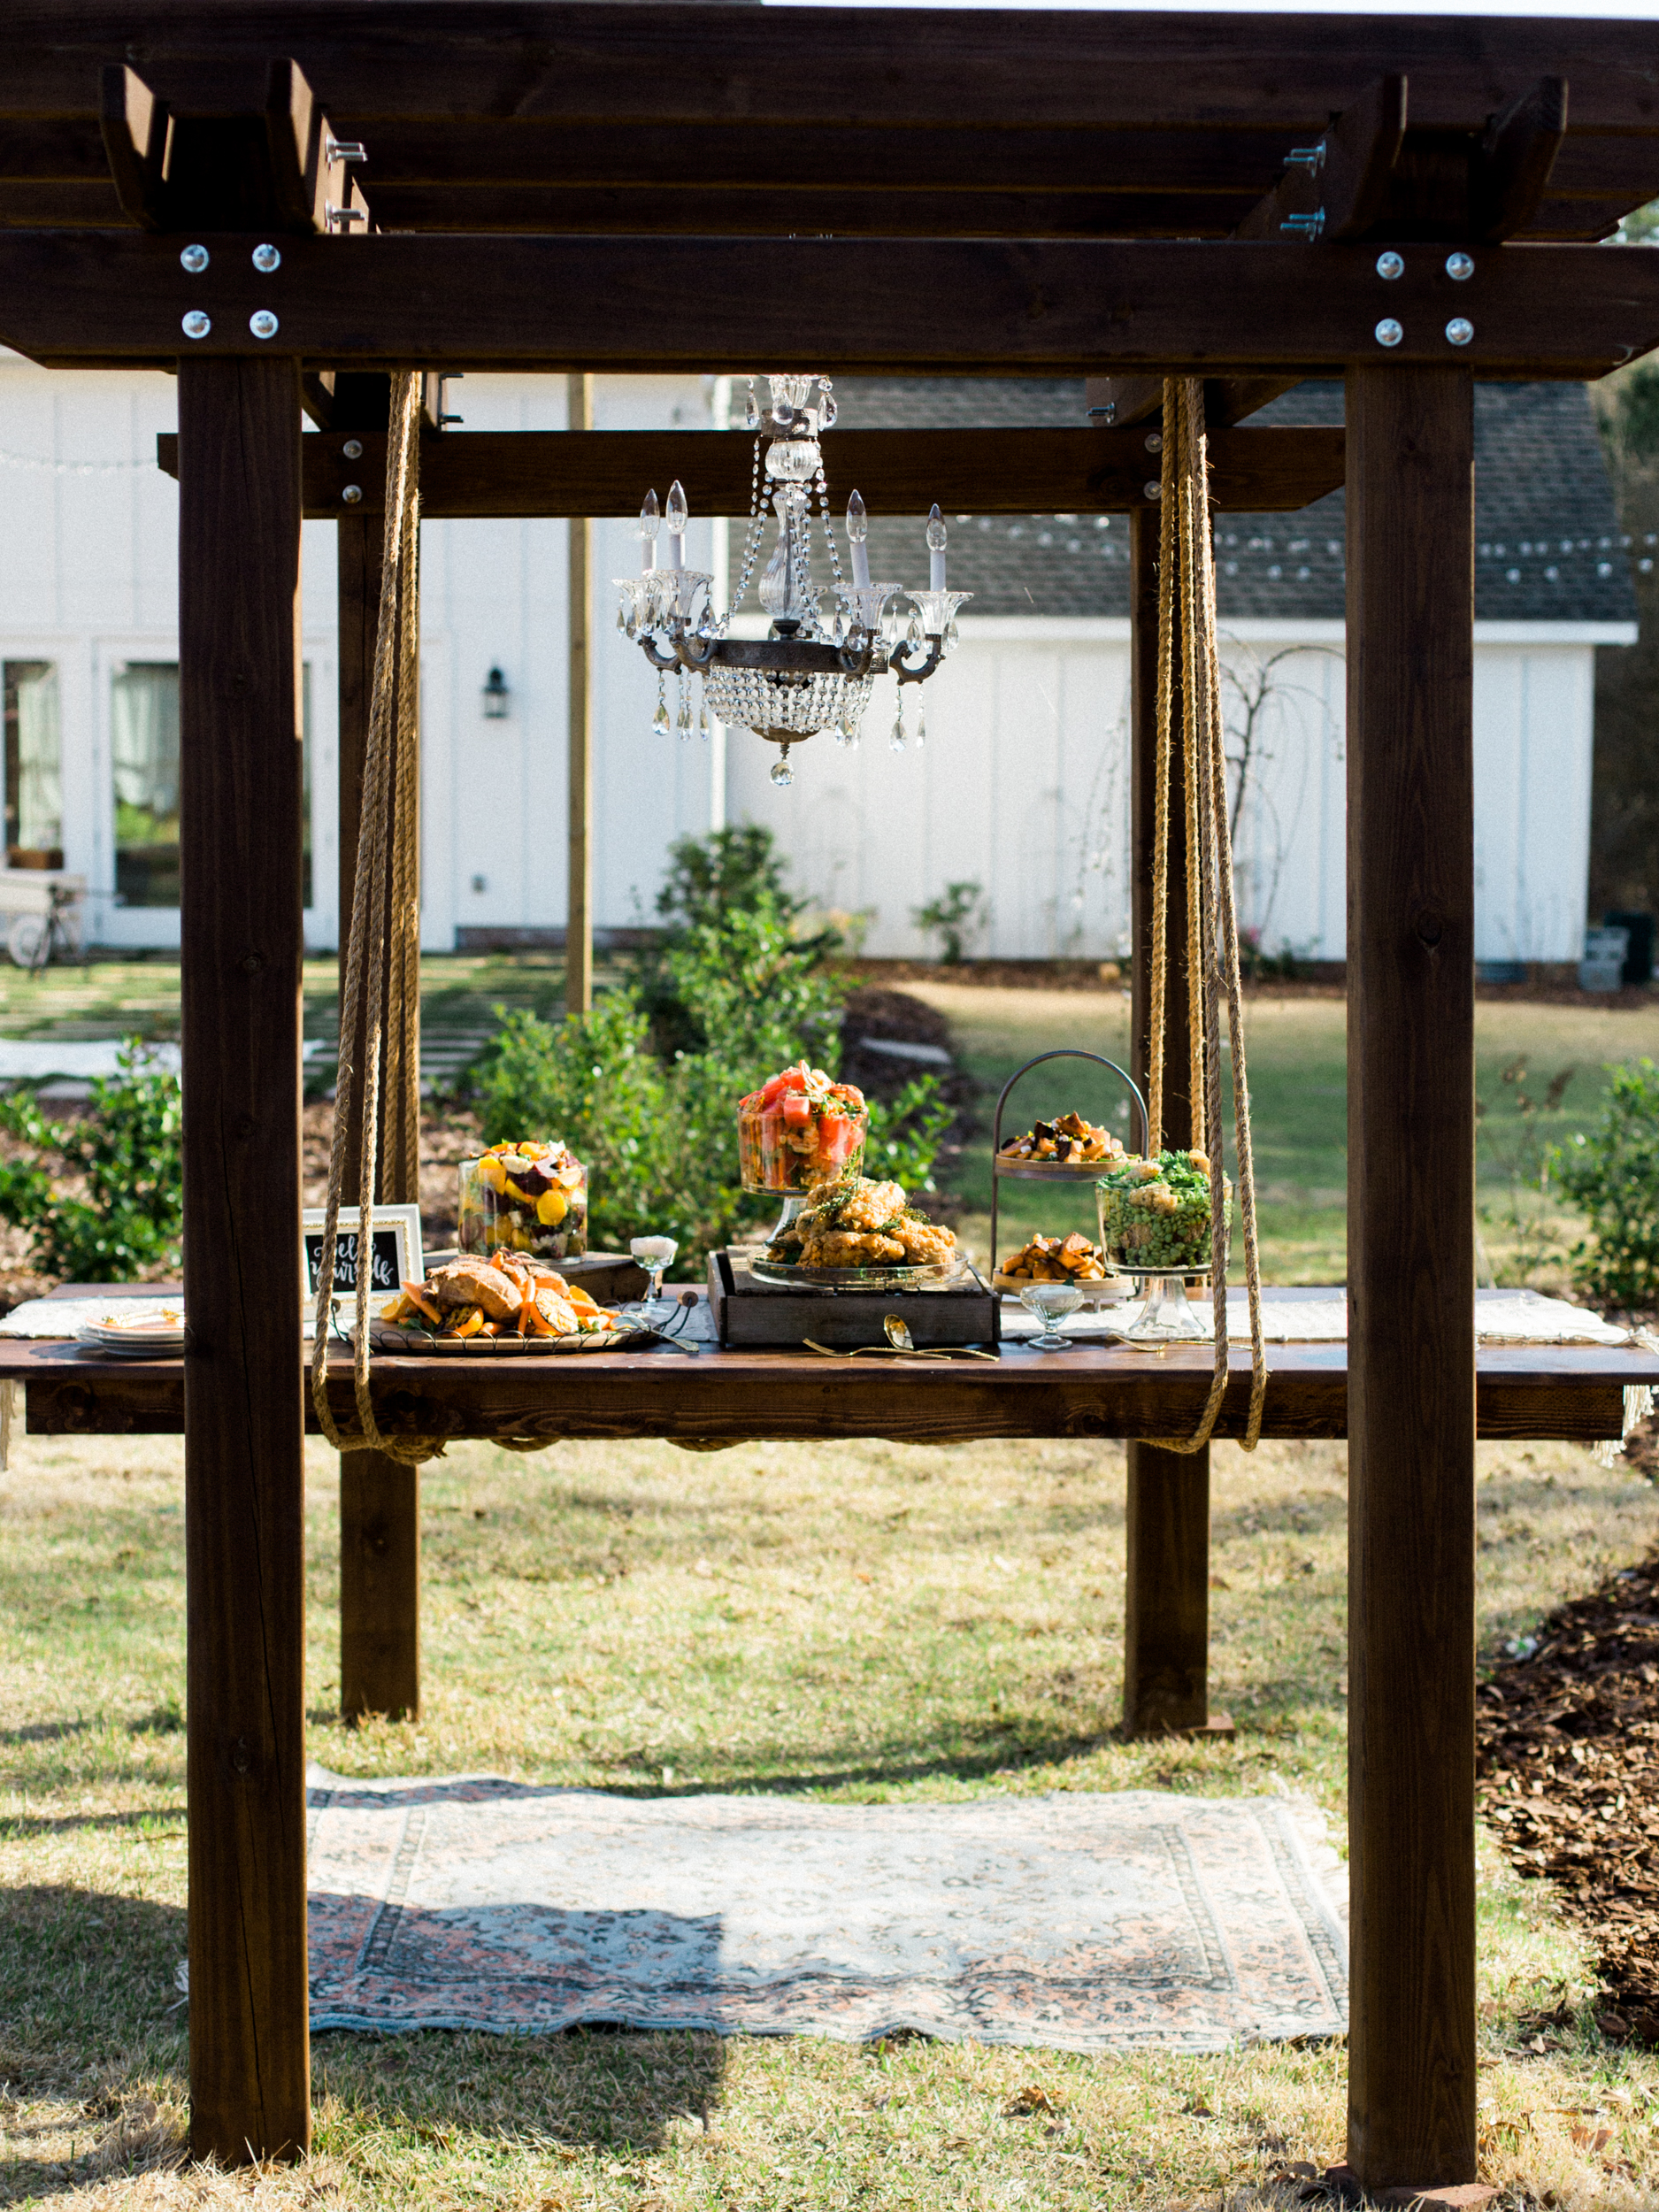 Outdoor Styled Southern Dinner Party - Behind-the-Scenes of a Styled Shoot (Hanging Buffet Table)